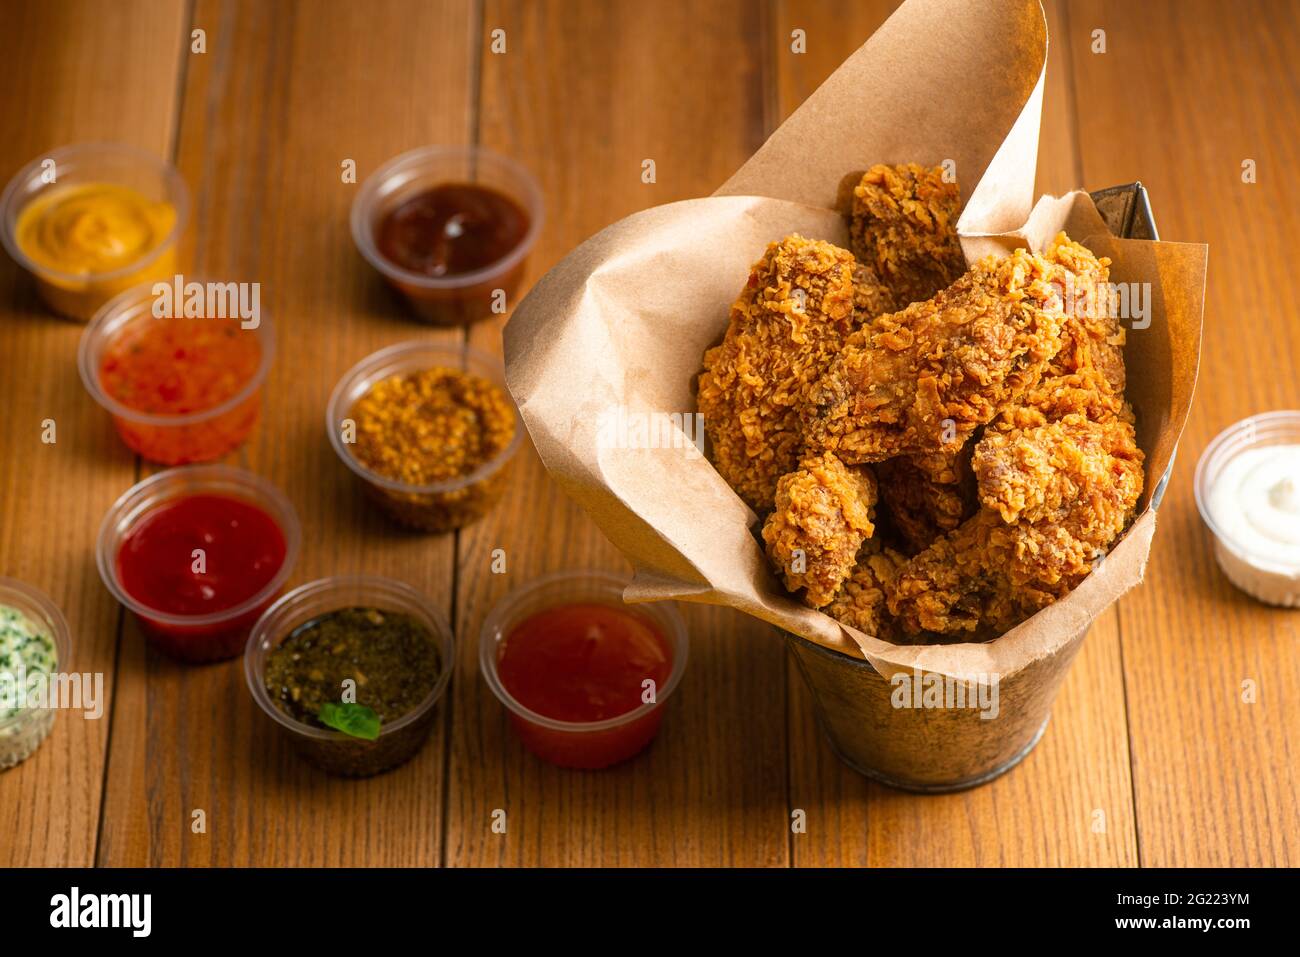 Bucket of chicken wings served with cups of different sauces on wooden table Stock Photo